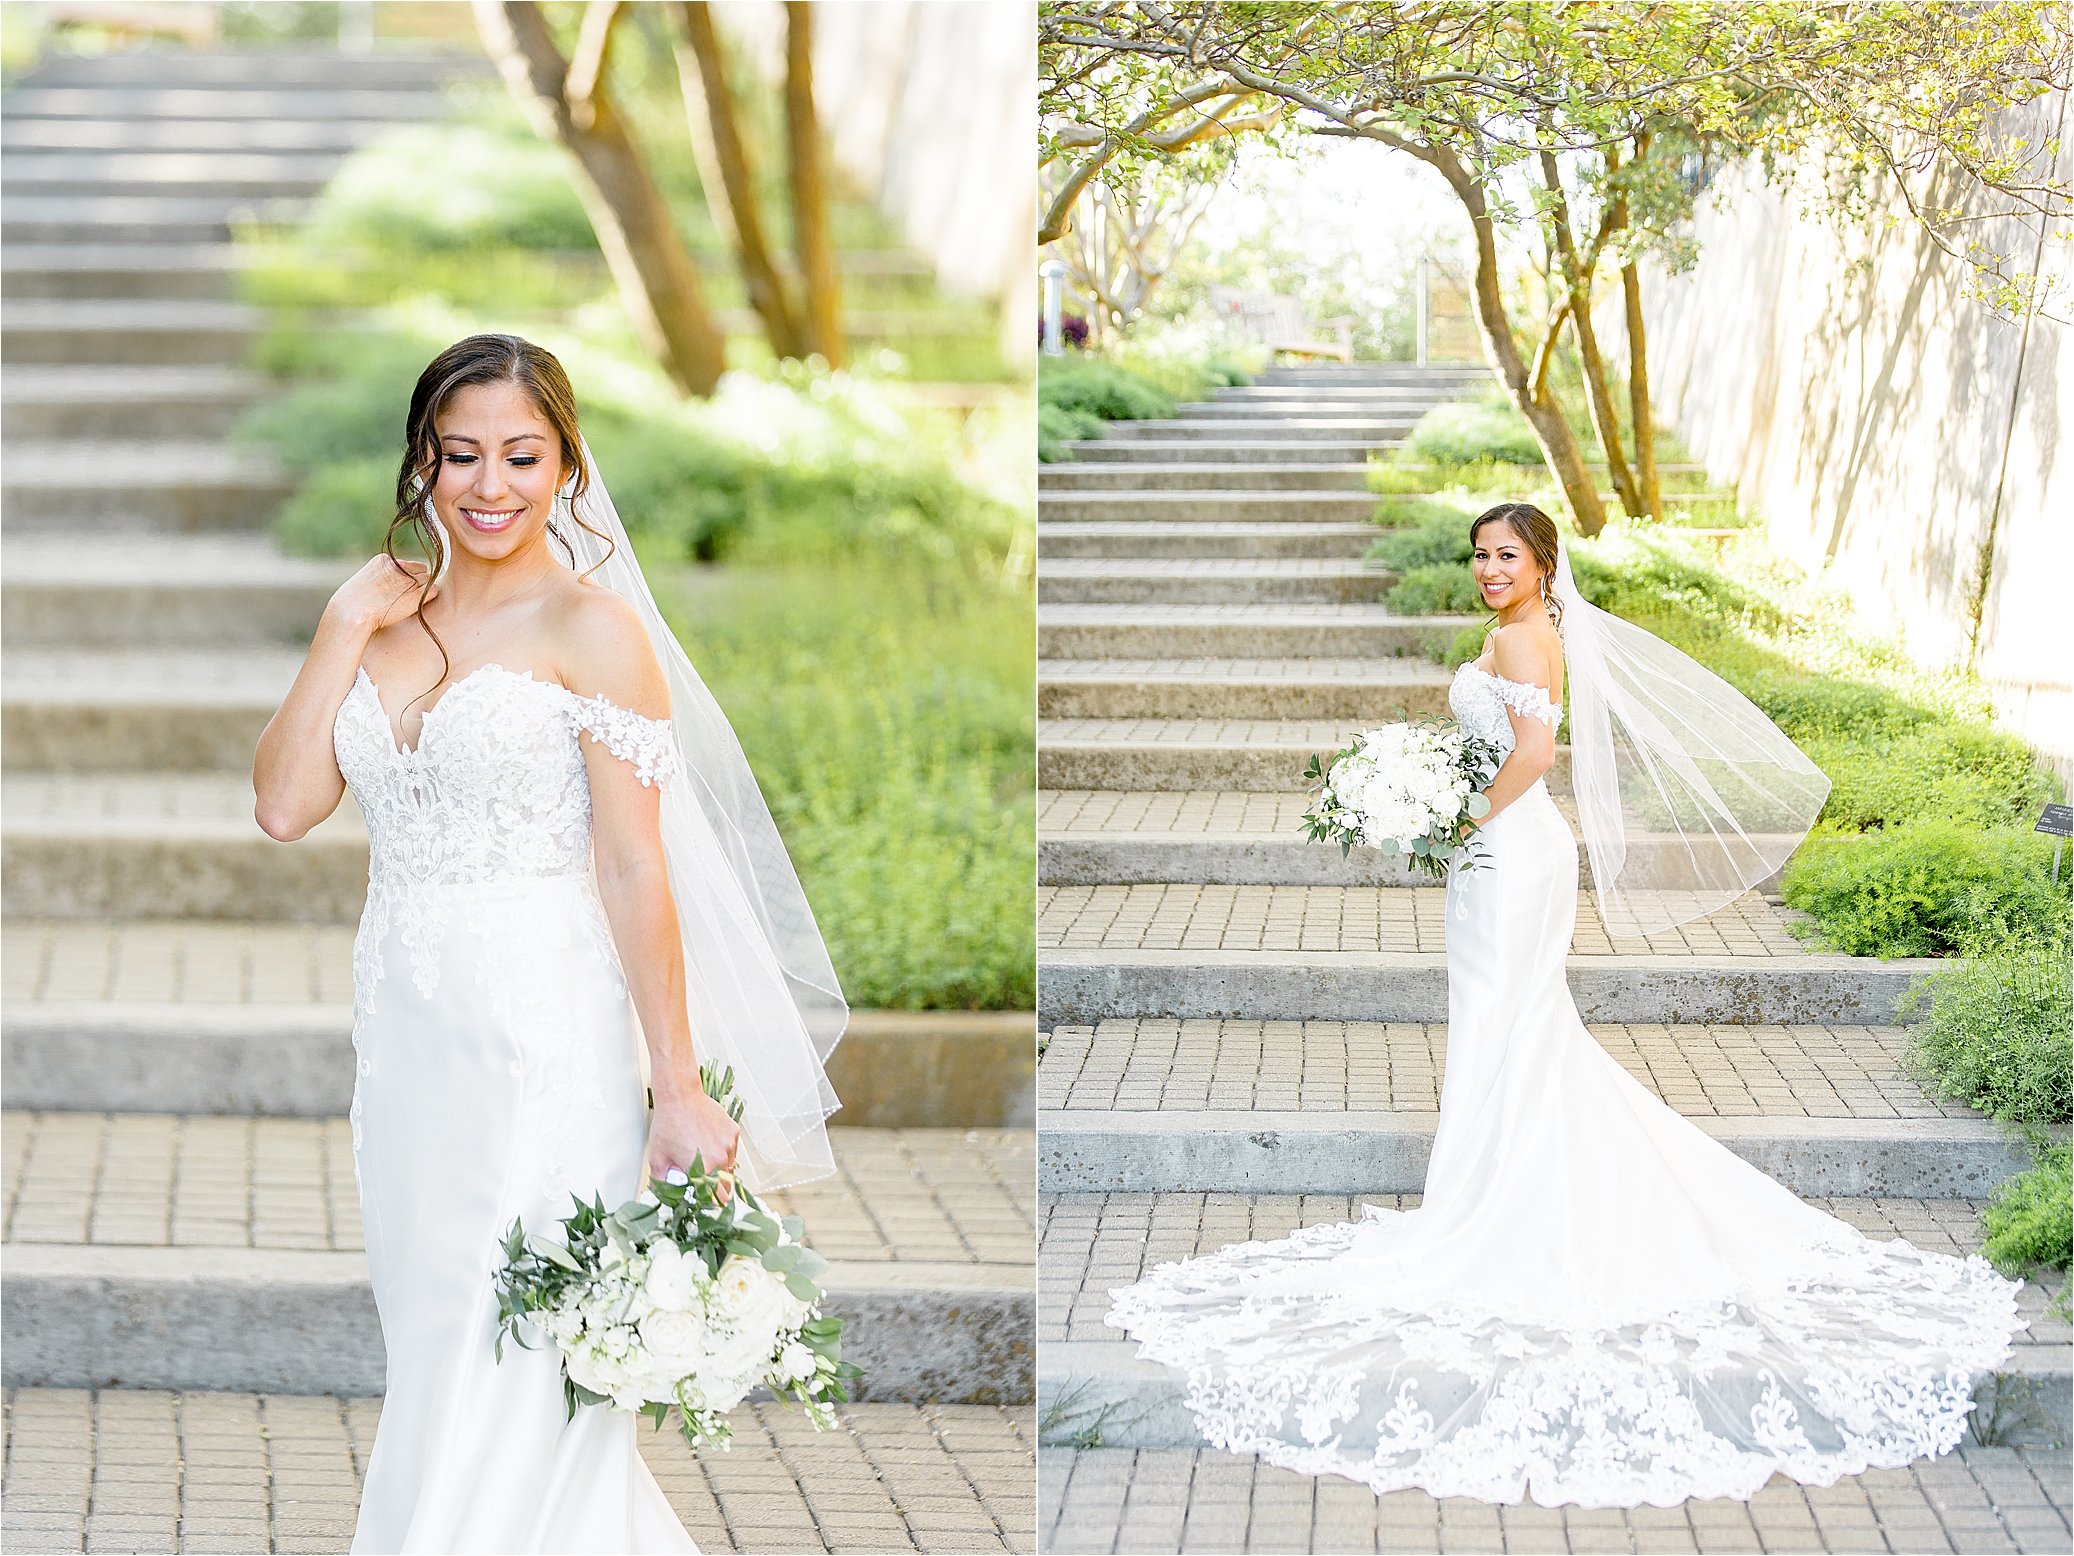 A bride in a lace dress holds her bouquet in front of stairs on a sunny dat at San Antonio Botanical Garden